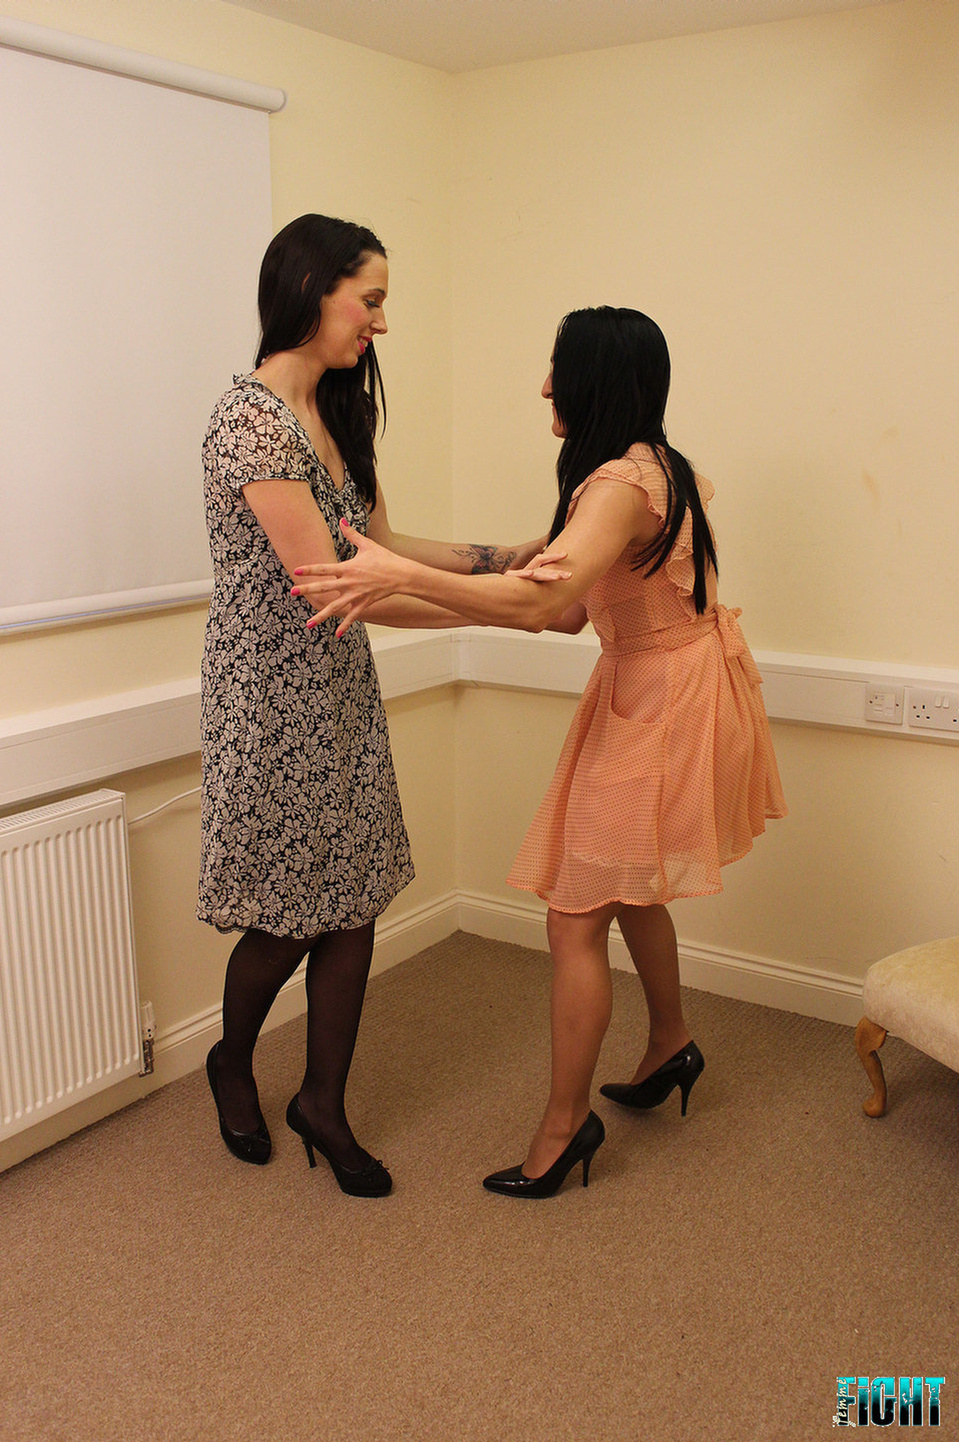 stockings, suspenders and knickers, go at each other in this catfight, tear...